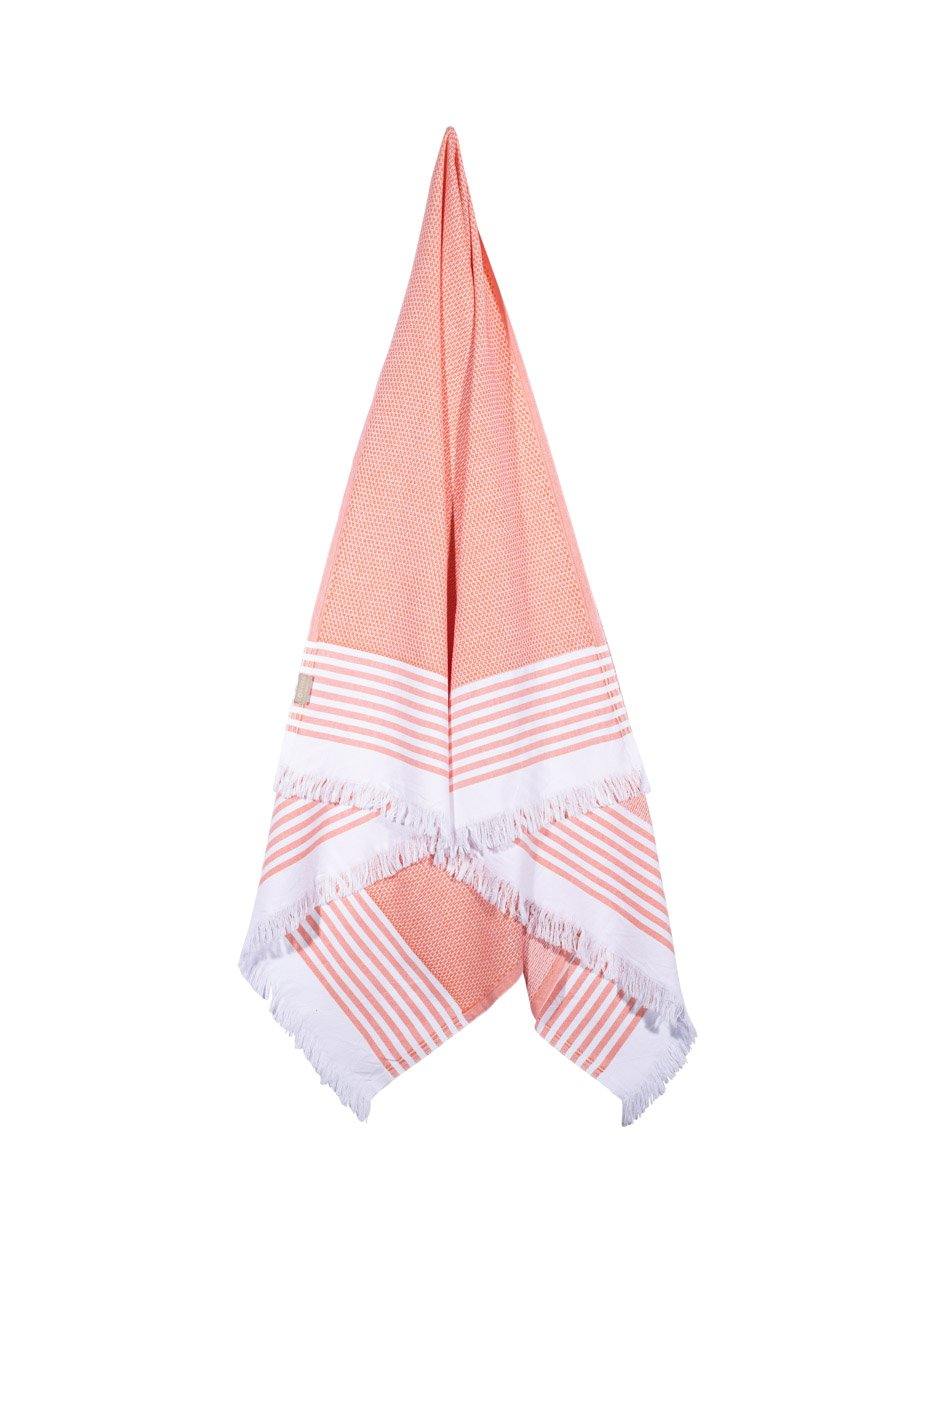 Coast - Coral and White Striped Hanging Towel